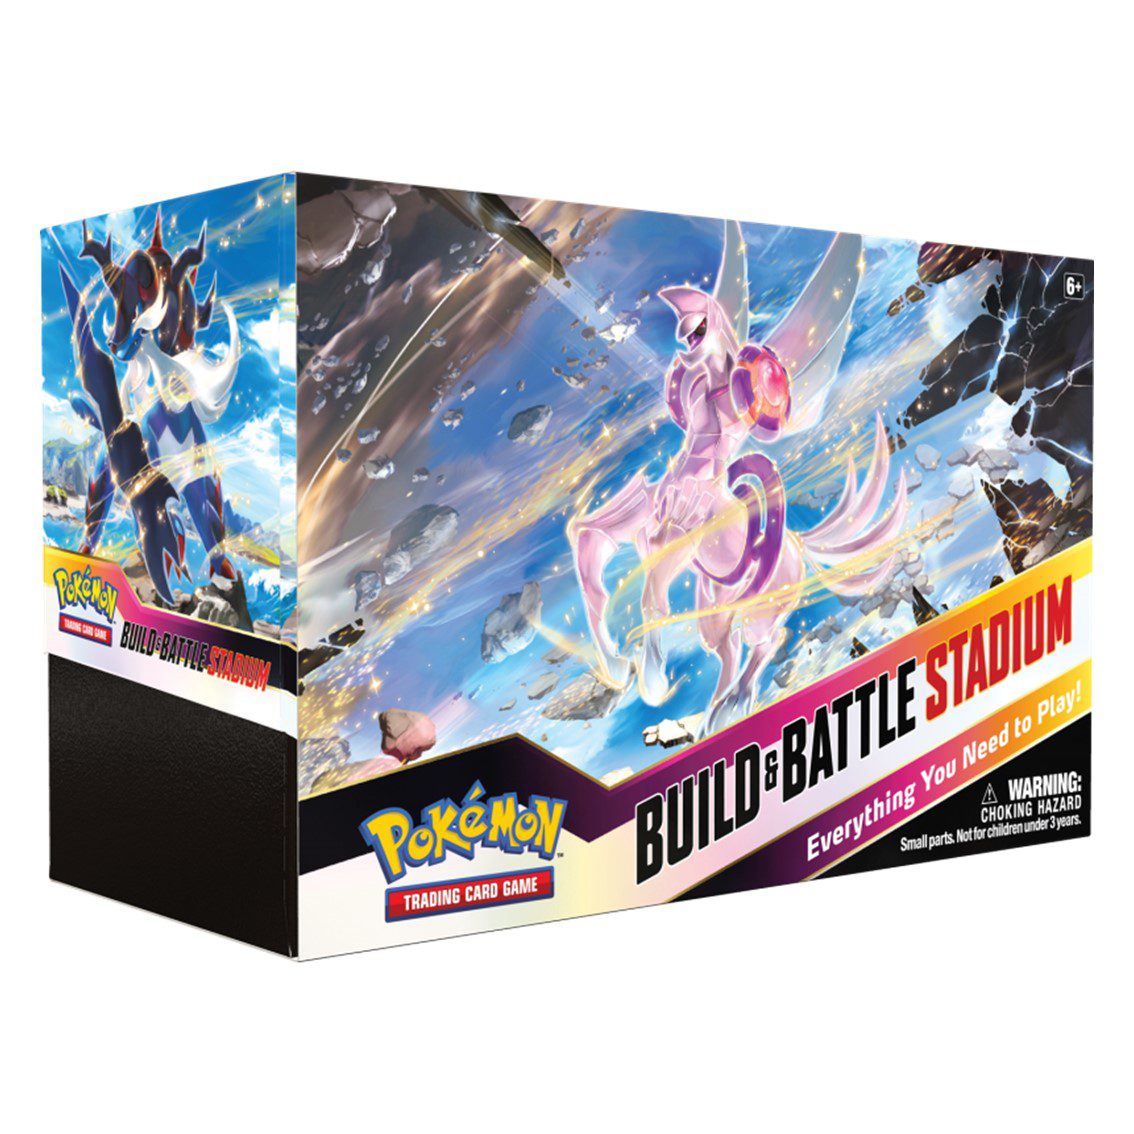 820650850400-PN-181-85040-Cod.-Articulo-MGS0000010743-Juego-de-cartas-pokemon-tcg-sword-and-shield-astral-radiance-build-and-battle-stadium-box-ingles-1